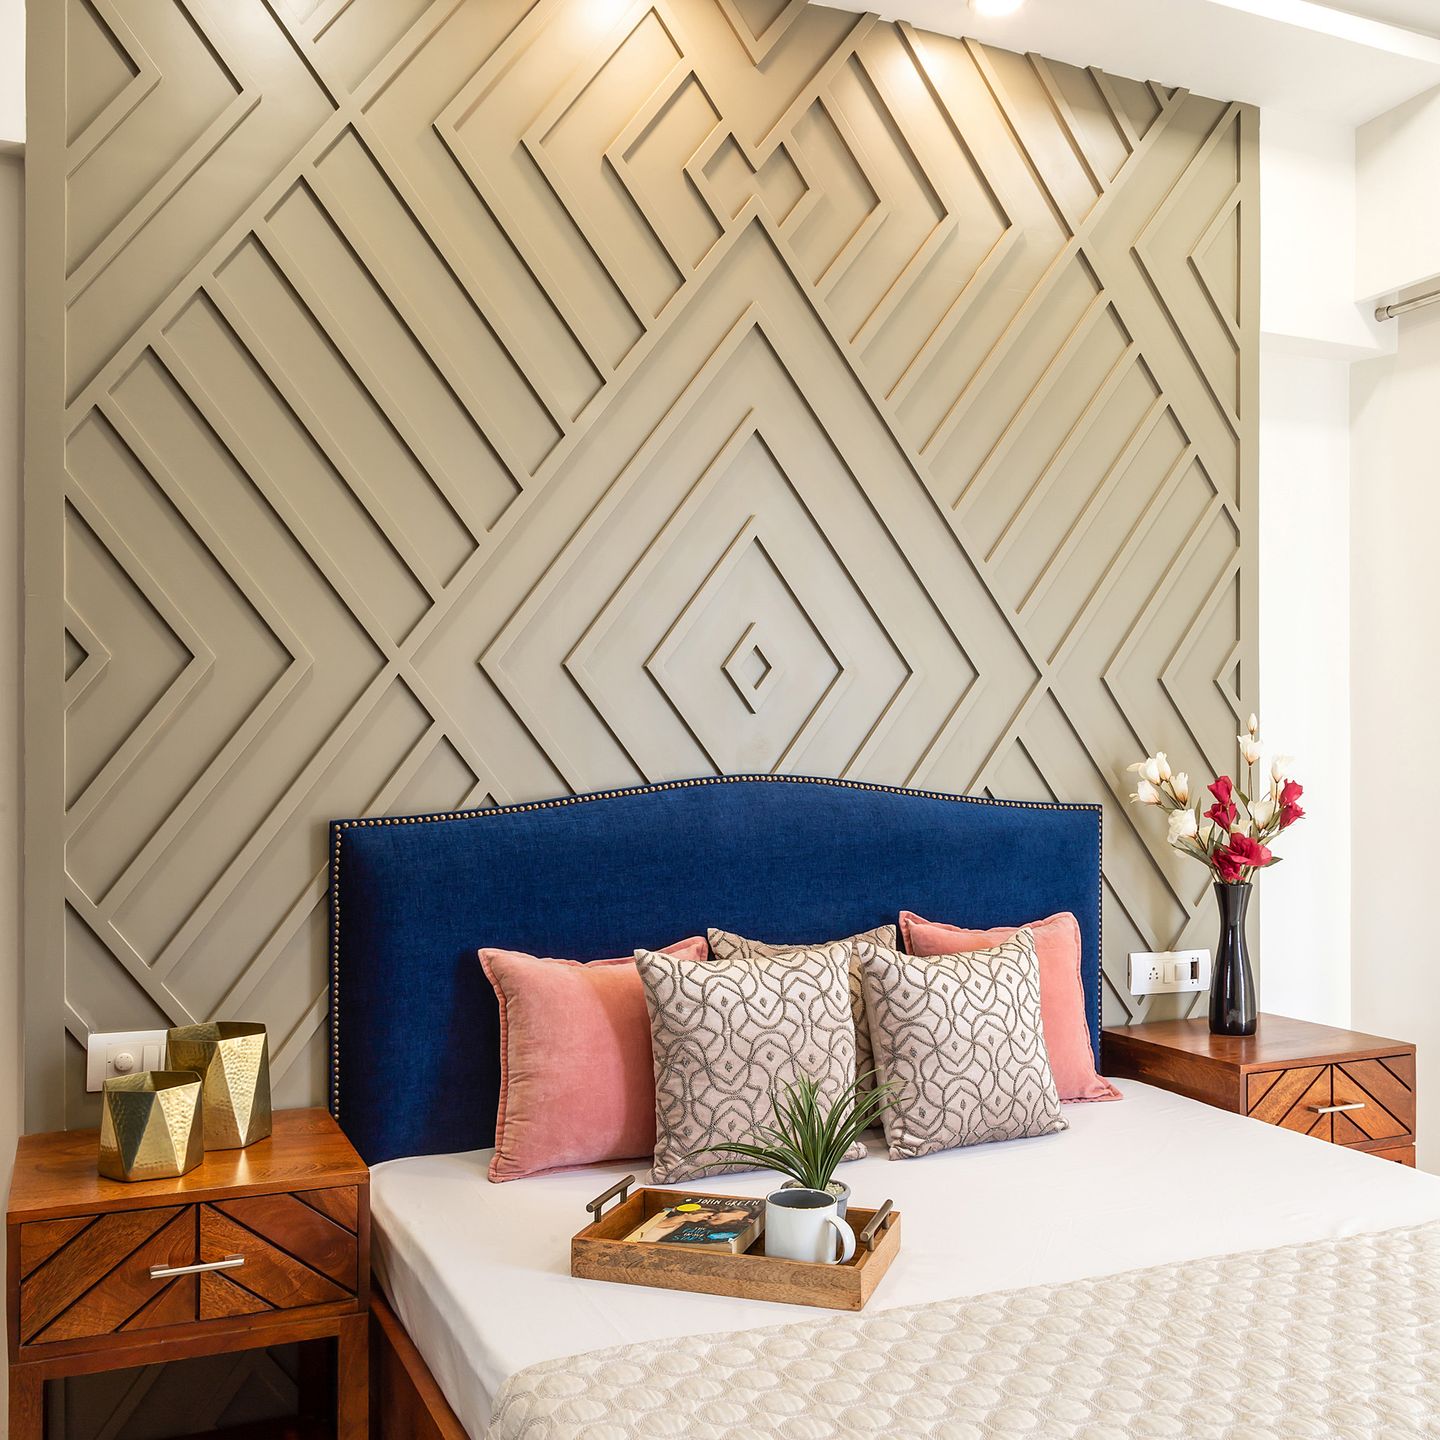 Bedroom Wall Design With Tan Classic Wall Trims And Paint - Livspace